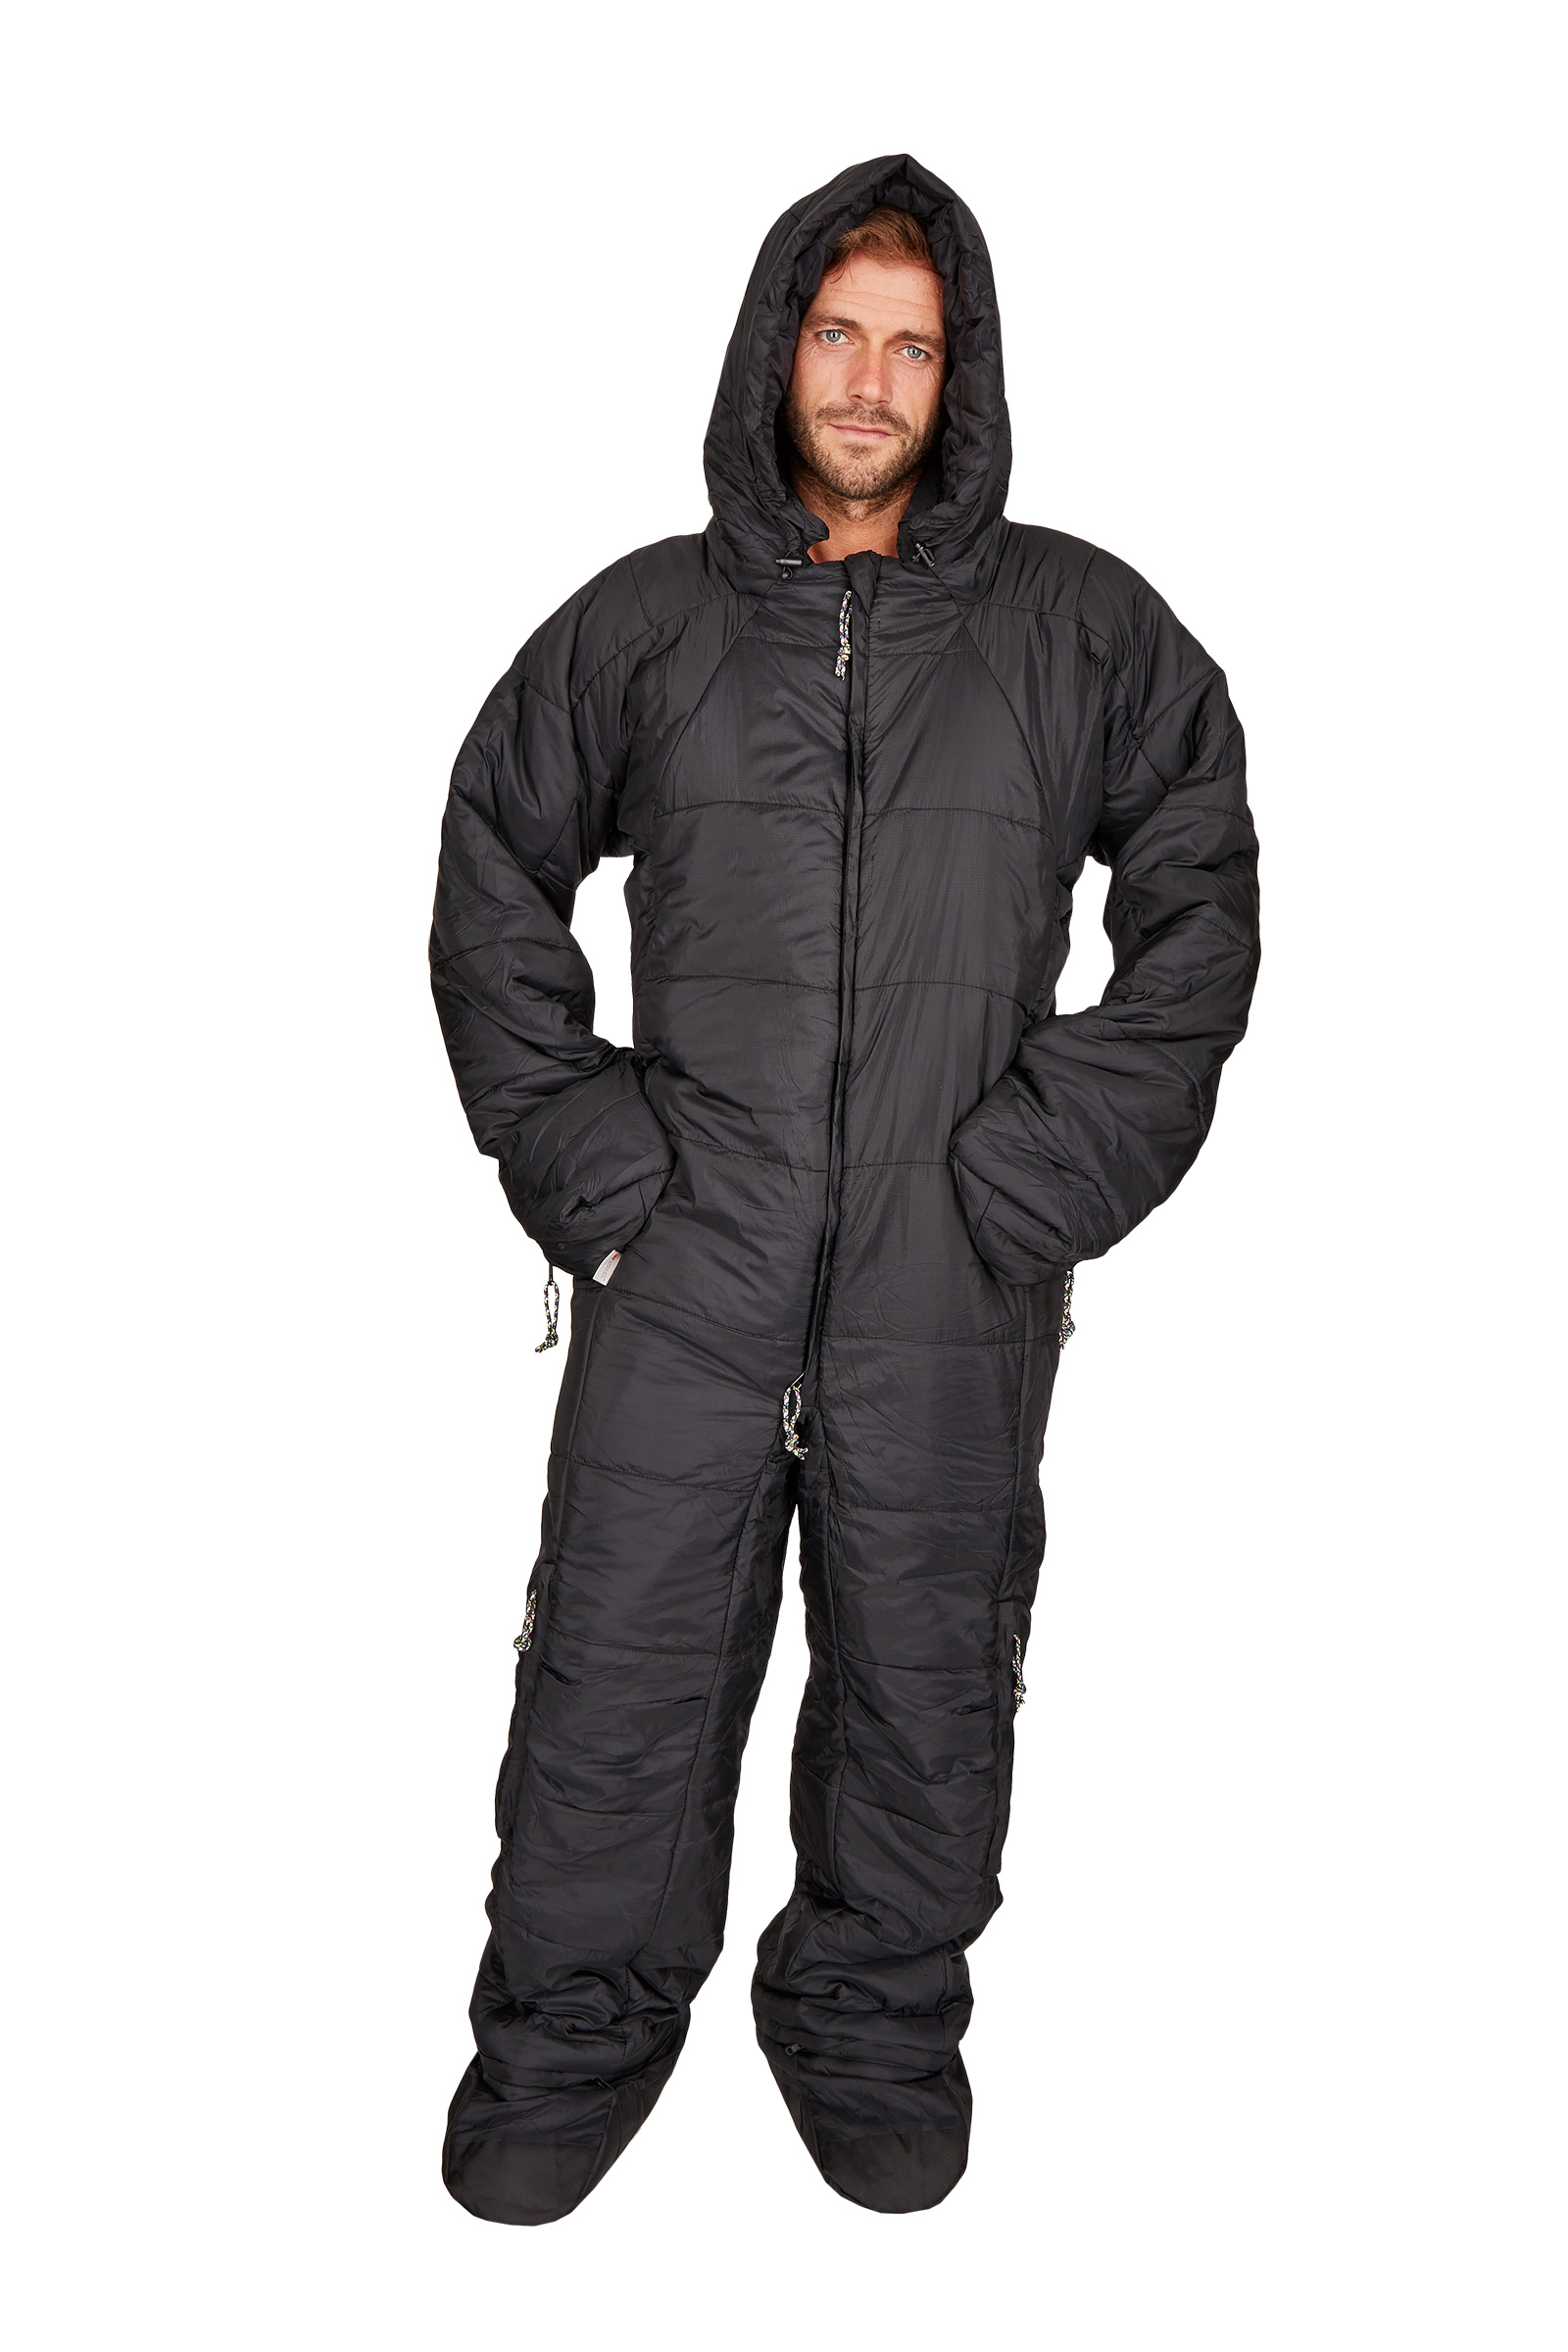 Adult Wearable Sleeping Bag Suit for Camping Standing 3 Season Full Body  Sleeping Wear for Travel Outdoor HikingHuman ShapedZipper DesignM   Amazonca Sports  Outdoors